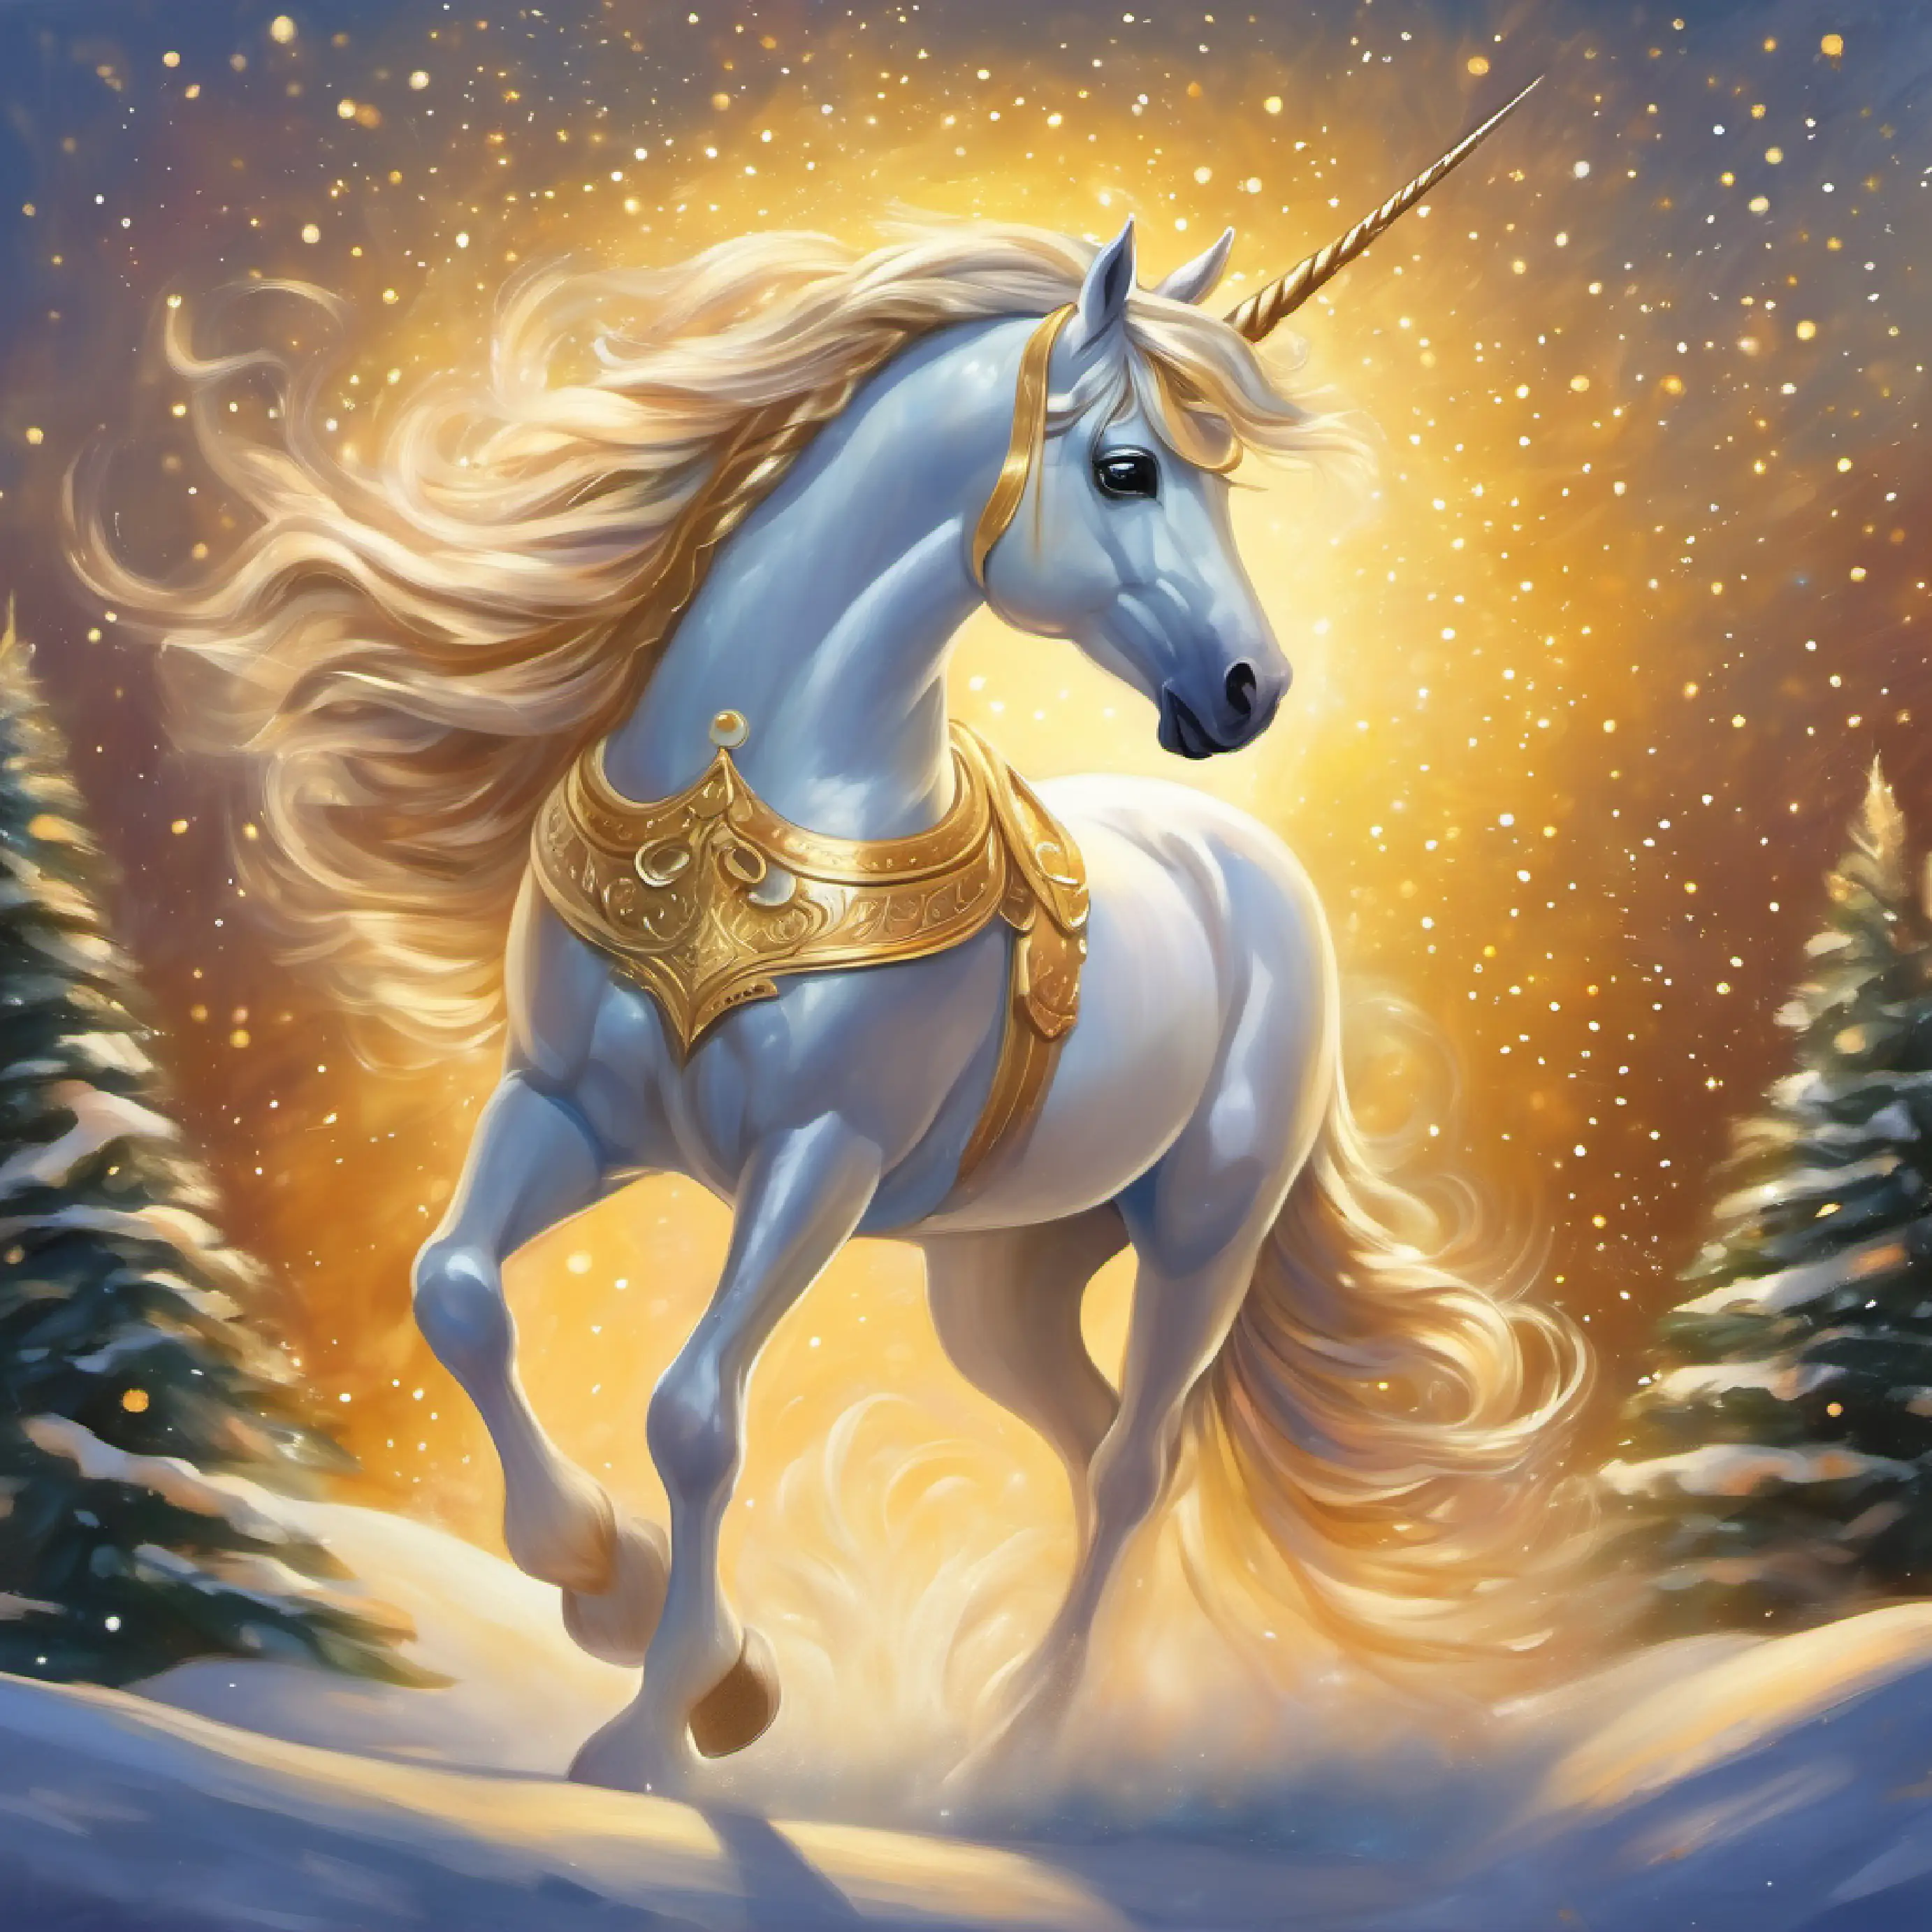 Young unicorn, golden hoof, stardust trail, eyes reflecting bravery realizes and accepts her uniqueness as a strength.